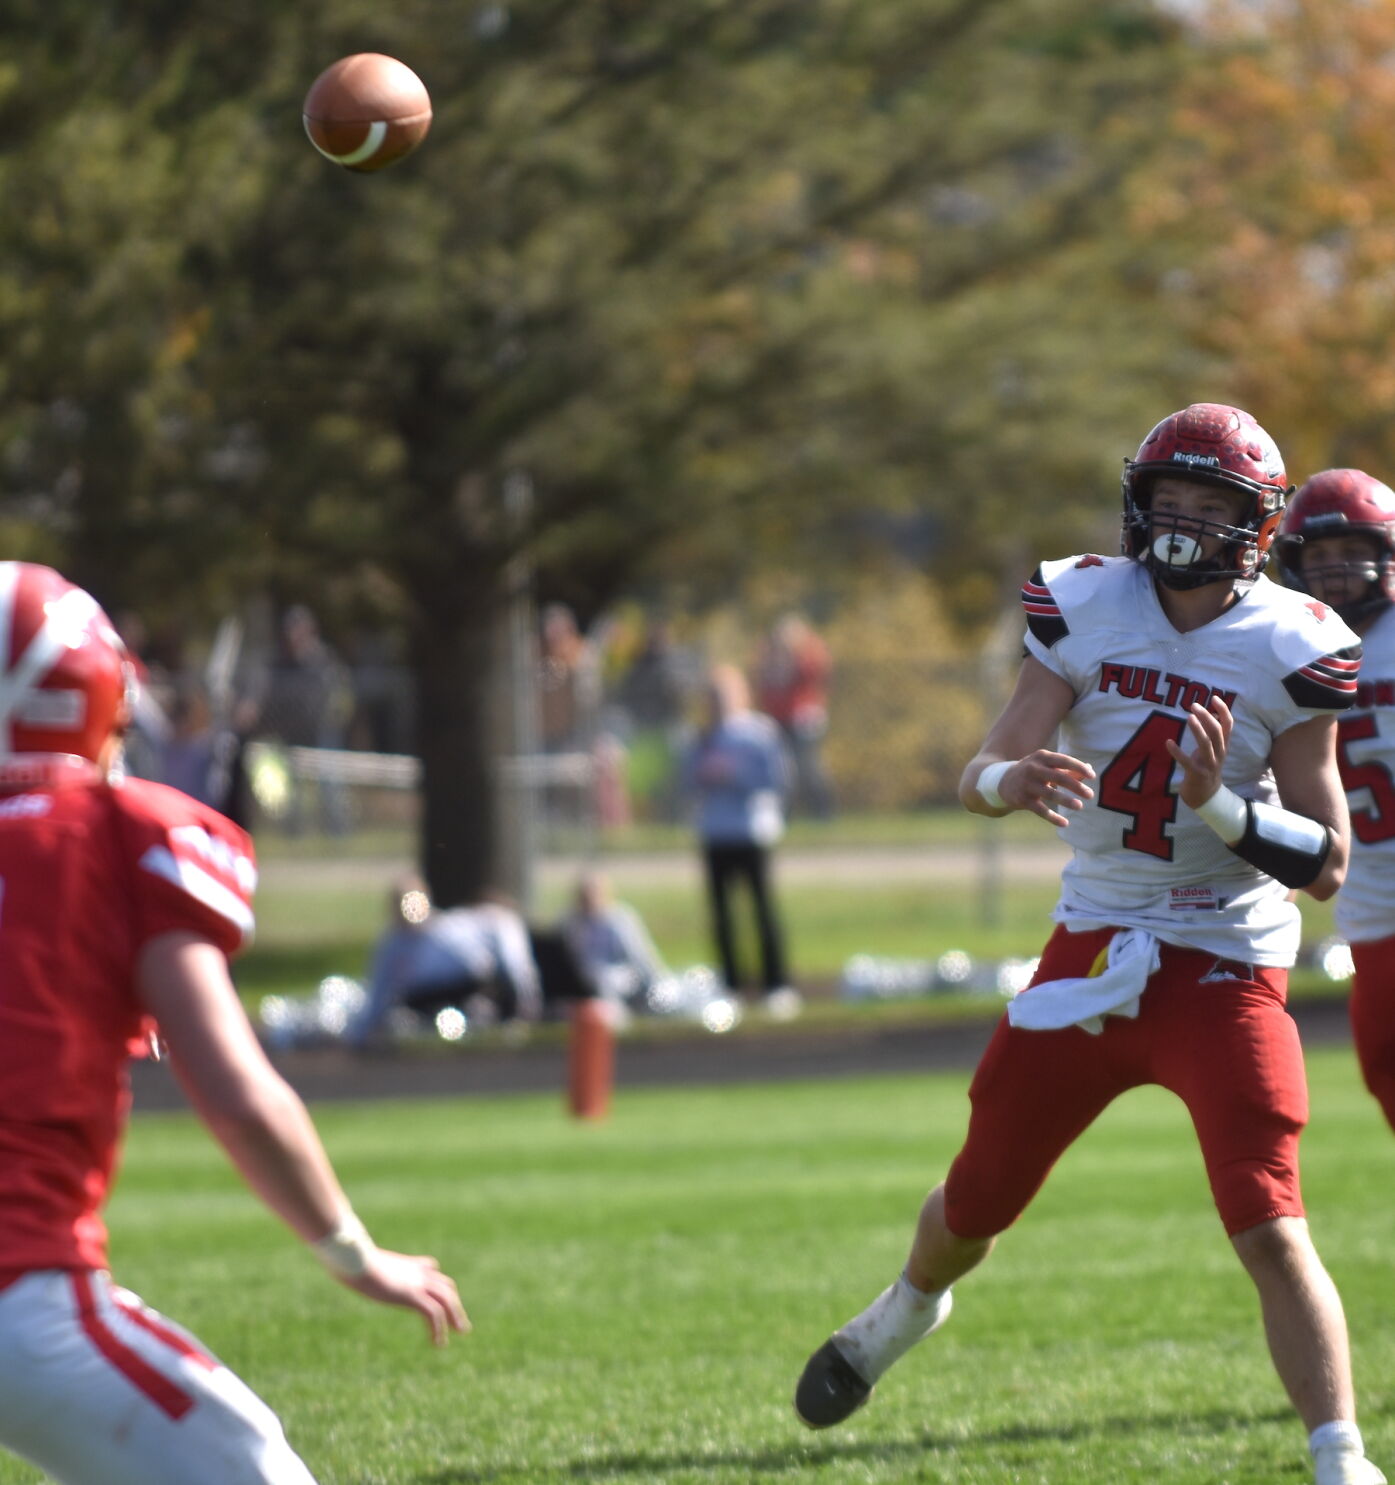 Fulton Steamers Football and Volleyball Teams Finish Strong in Iowa and Illinois Fall Sports Seasons